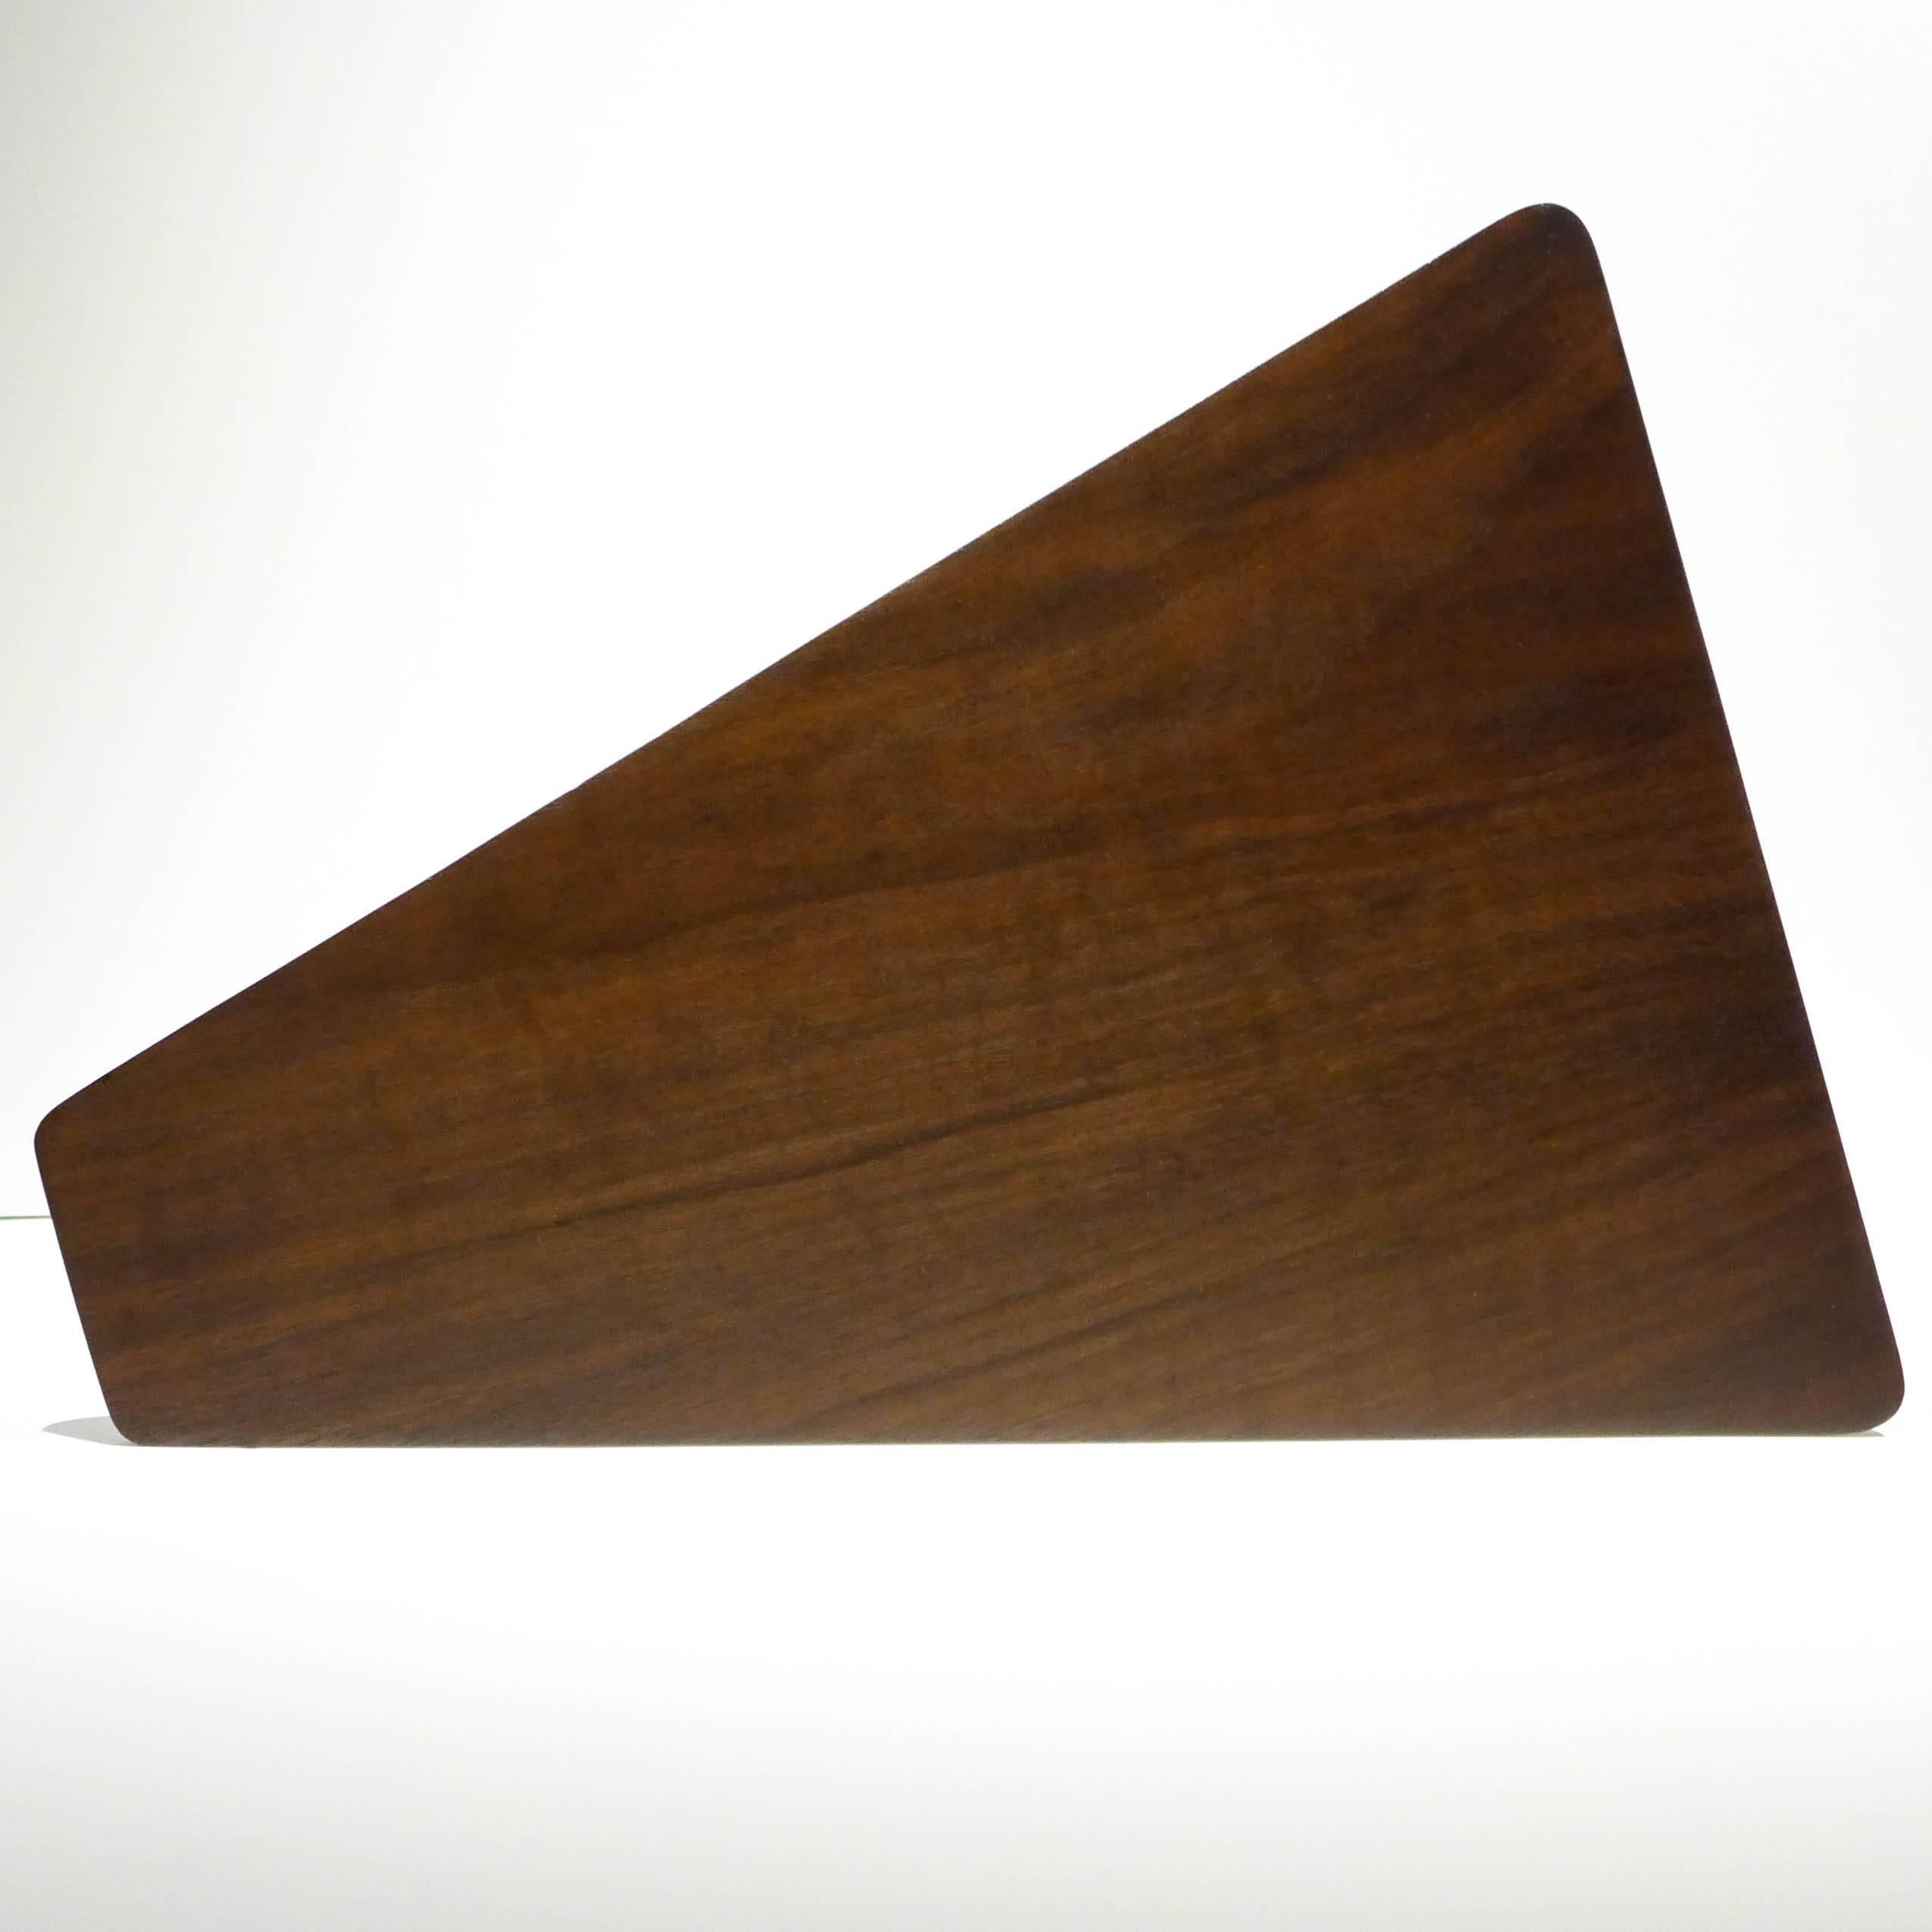 American Trapezoidal Side Table by Martin Freedgood